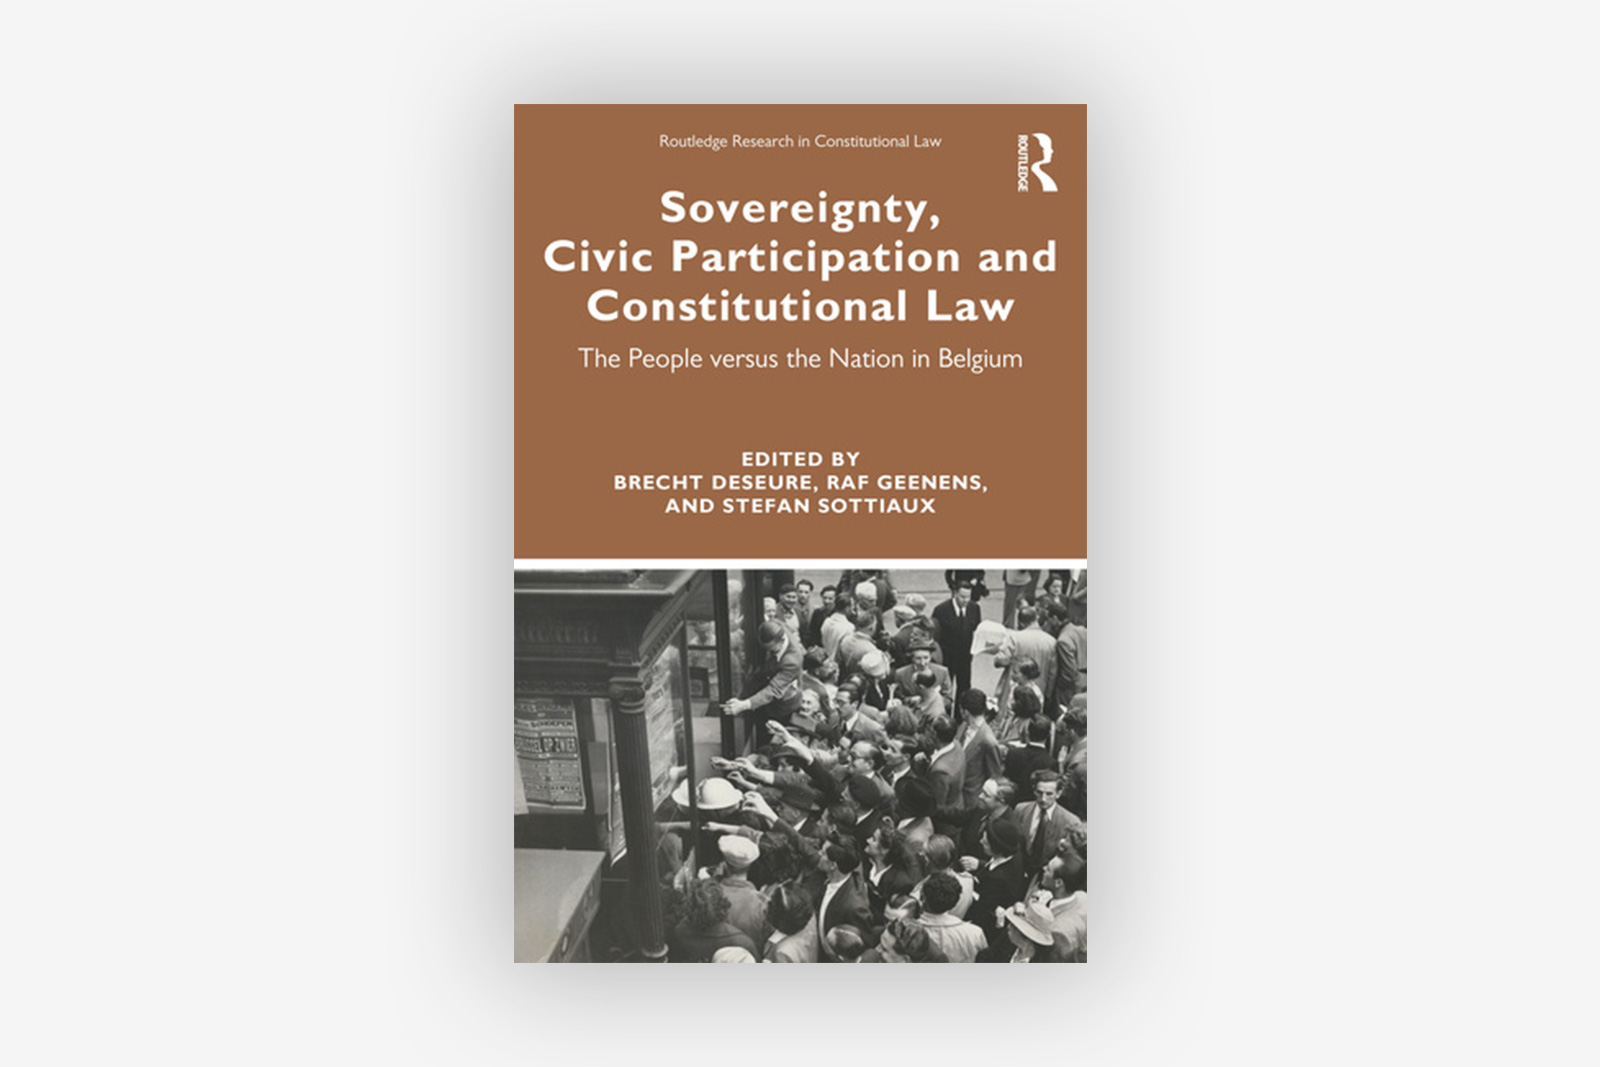 Sovereignty, Civic Participation and Constitutional Law, The People versus the Nation in Belgium (2021)